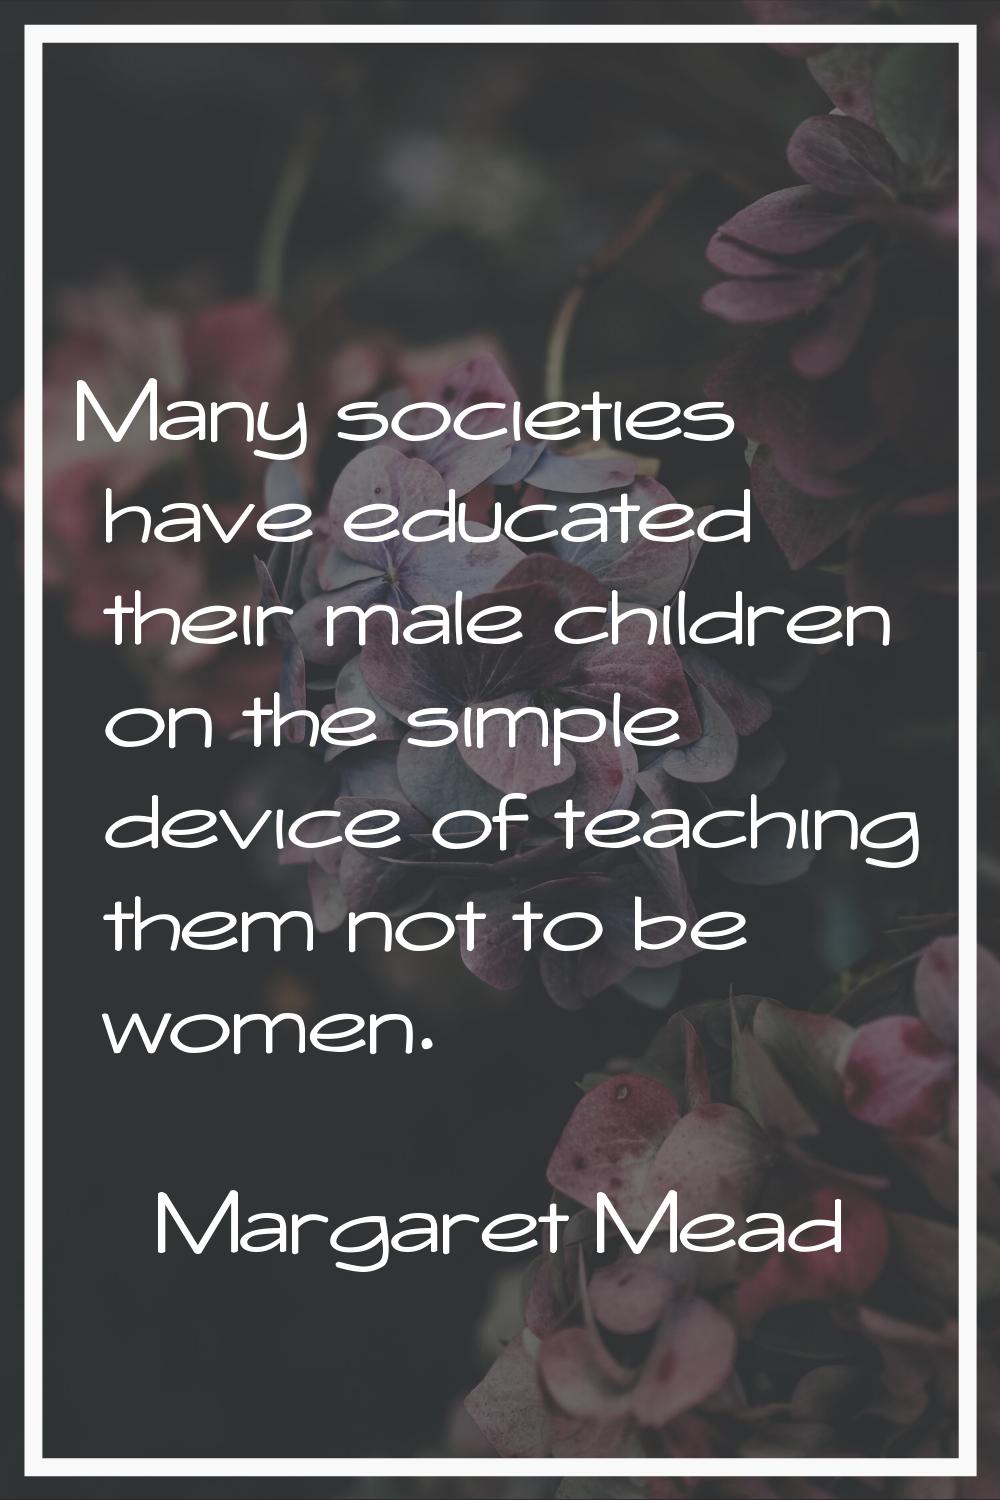 Many societies have educated their male children on the simple device of teaching them not to be wo